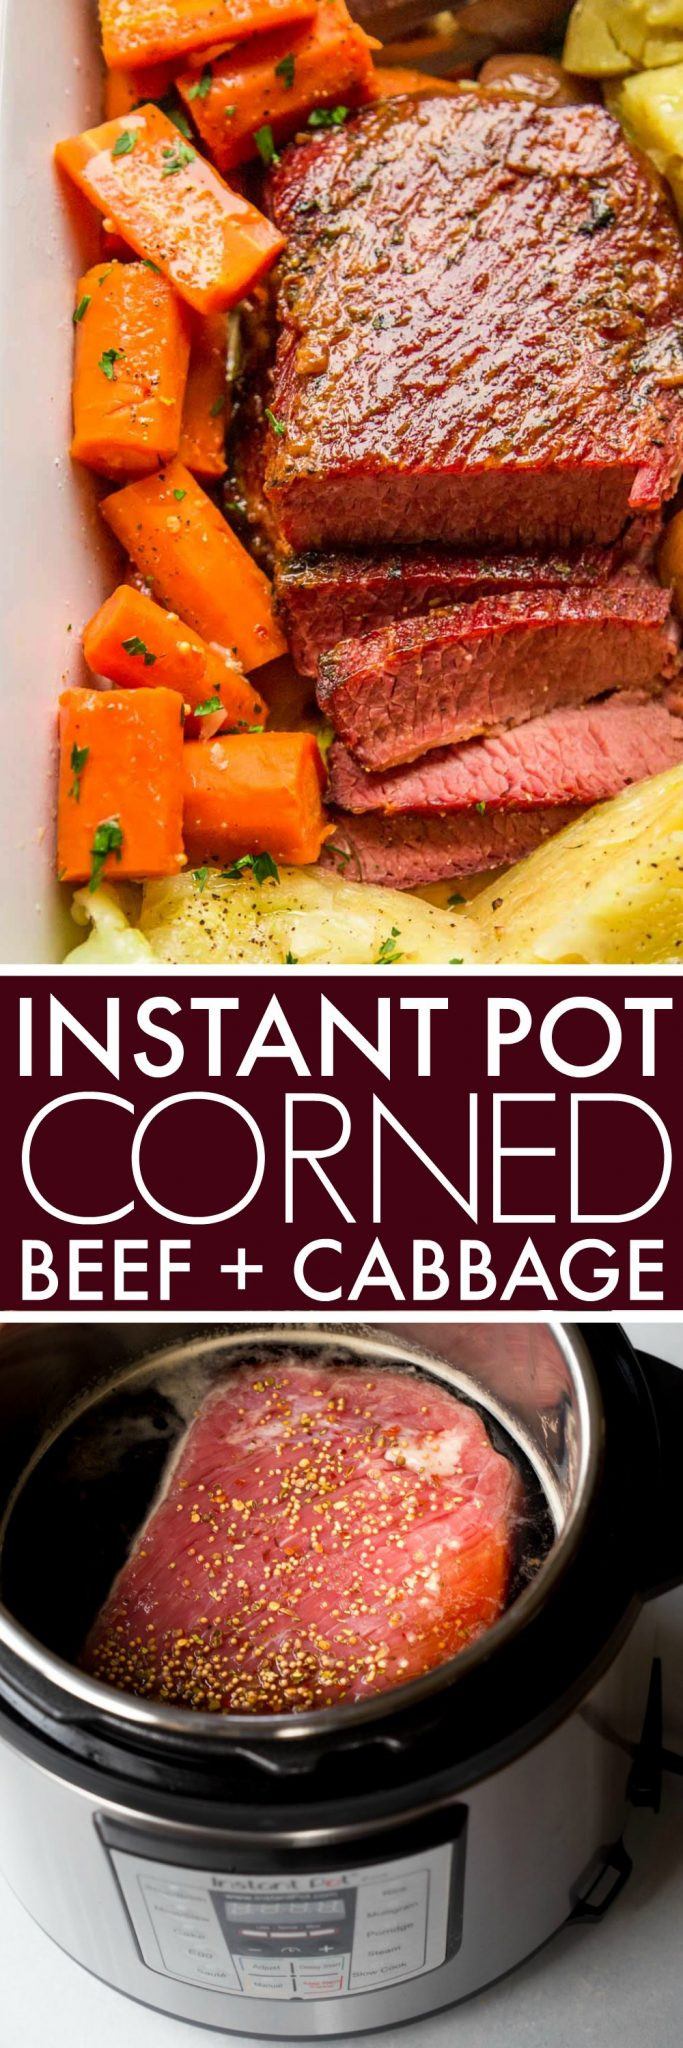 Corned Beef And Cabbage Instant Pot
 Instant Pot Glazed Corned Beef & Cabbage